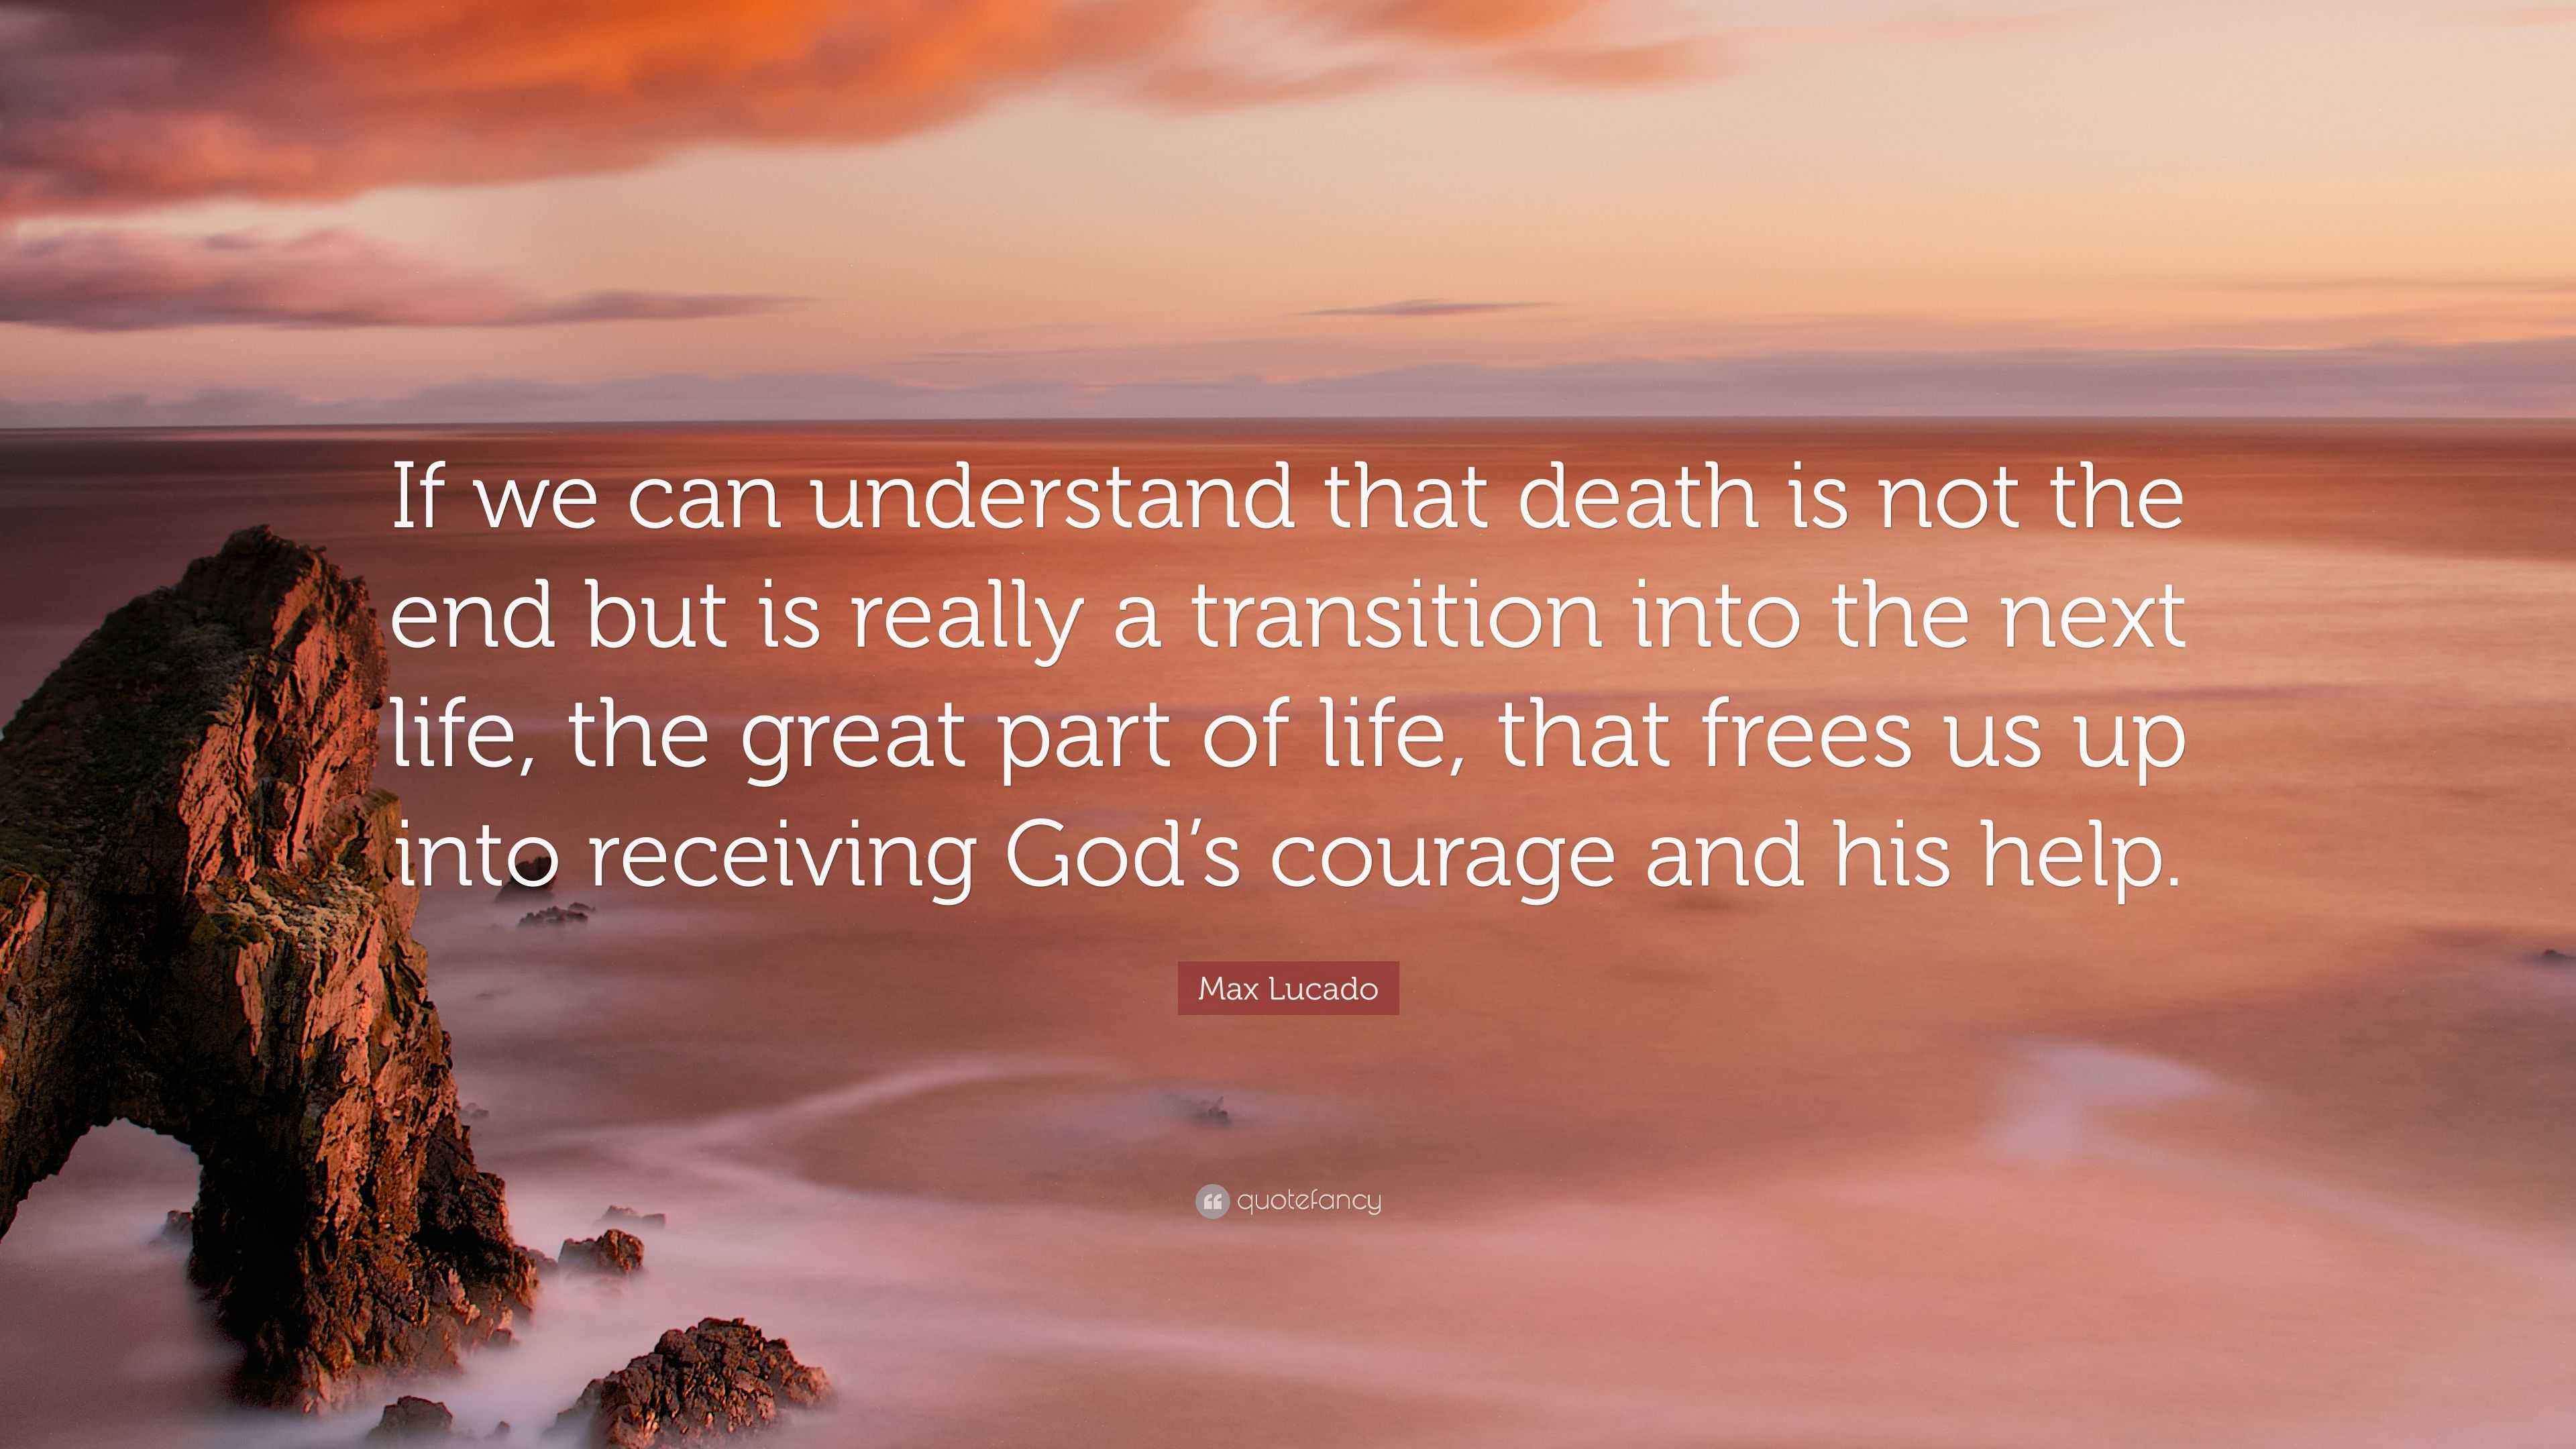 4956979 Max Lucado Quote If we can understand that death is not the end